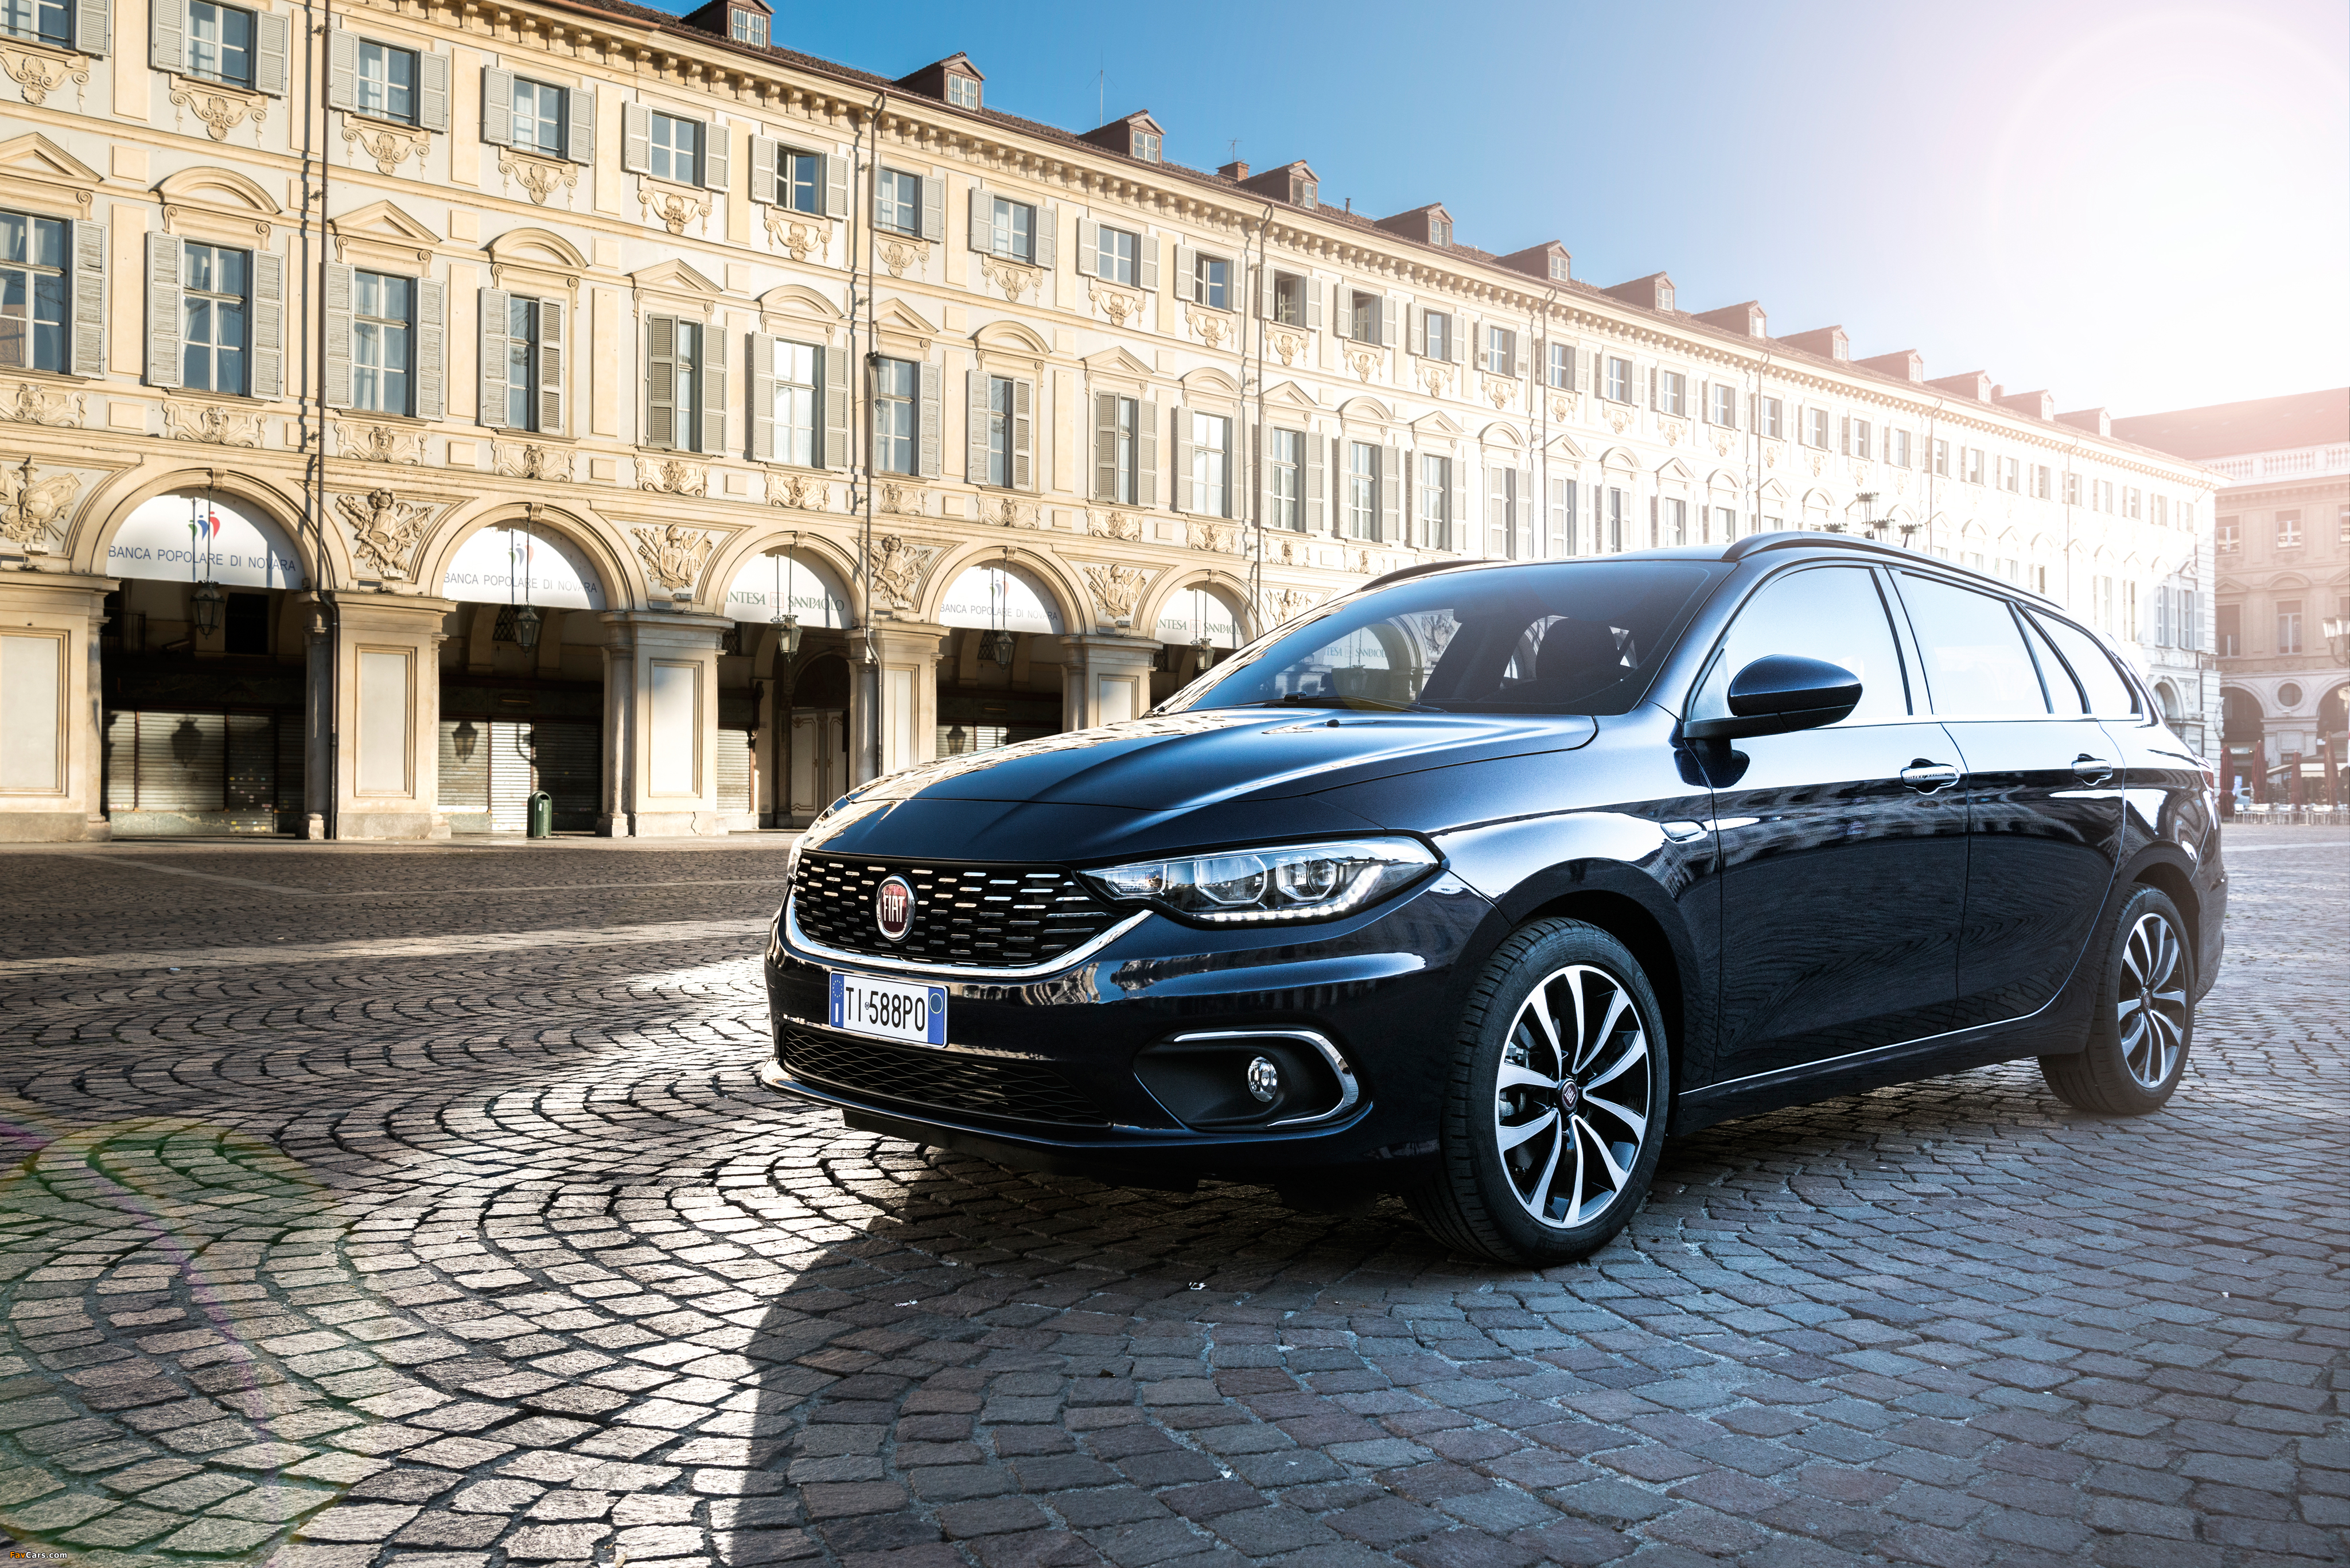 Fiat Tipo Station Wagon (357) 2016 images (4096 x 2733)